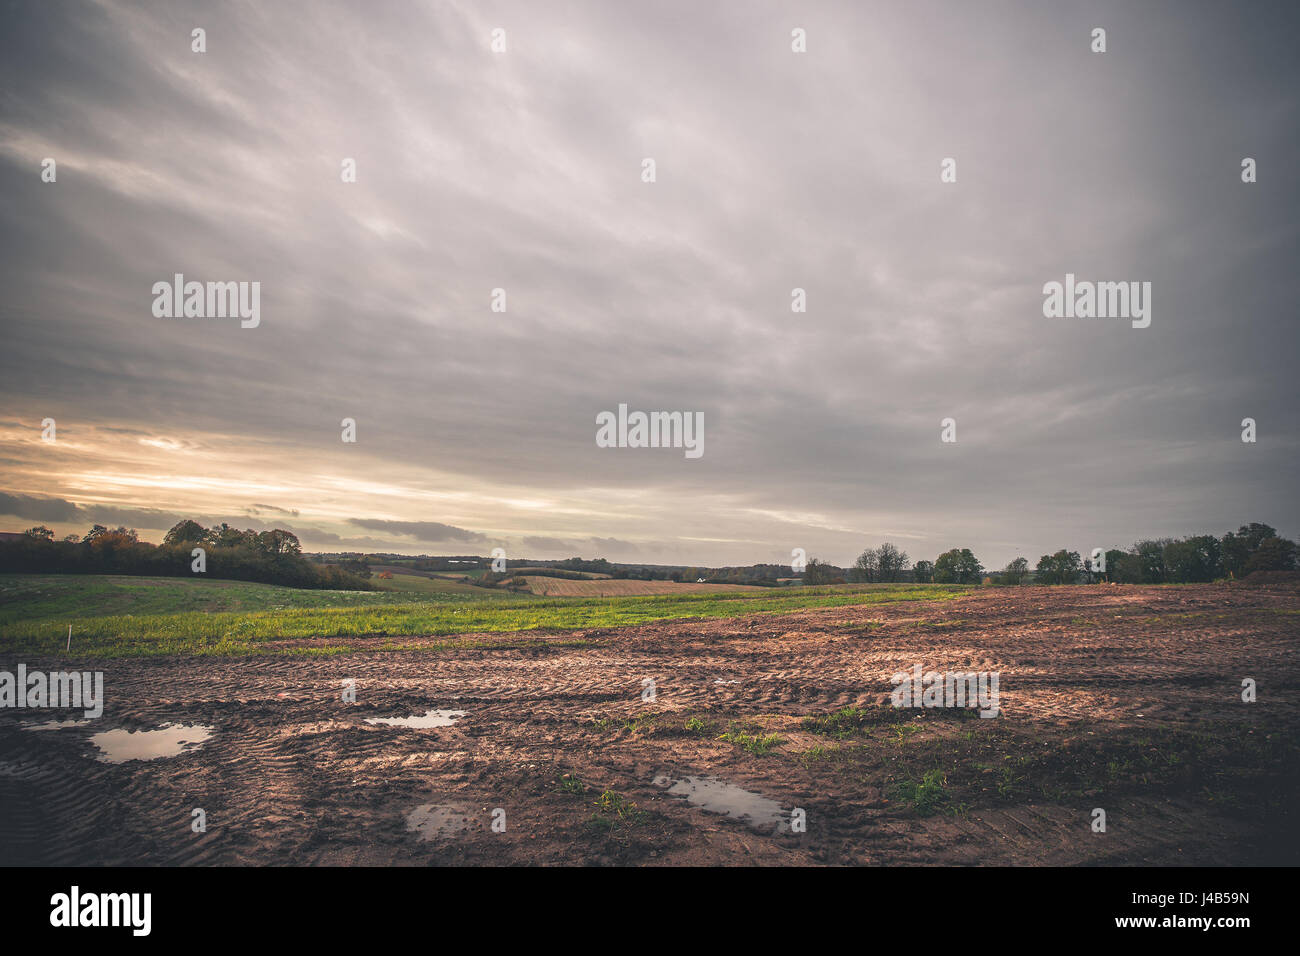 Landscape with wheel tracks on a muddy field in autumn in cloudy weather in off-road terrain Stock Photo